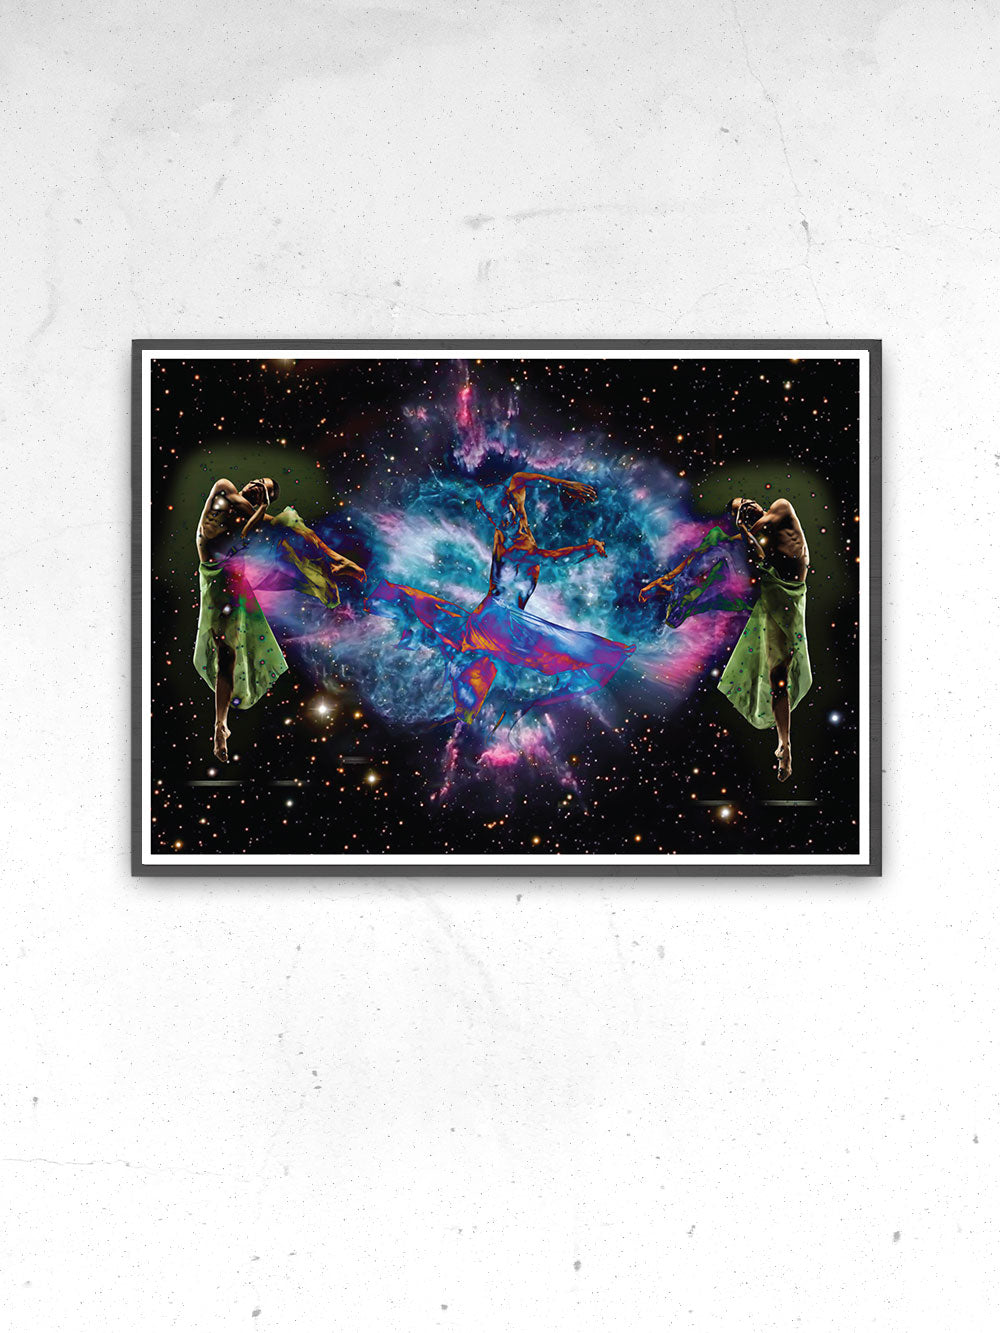 Dancing in Space Art Print in a frame on a wall